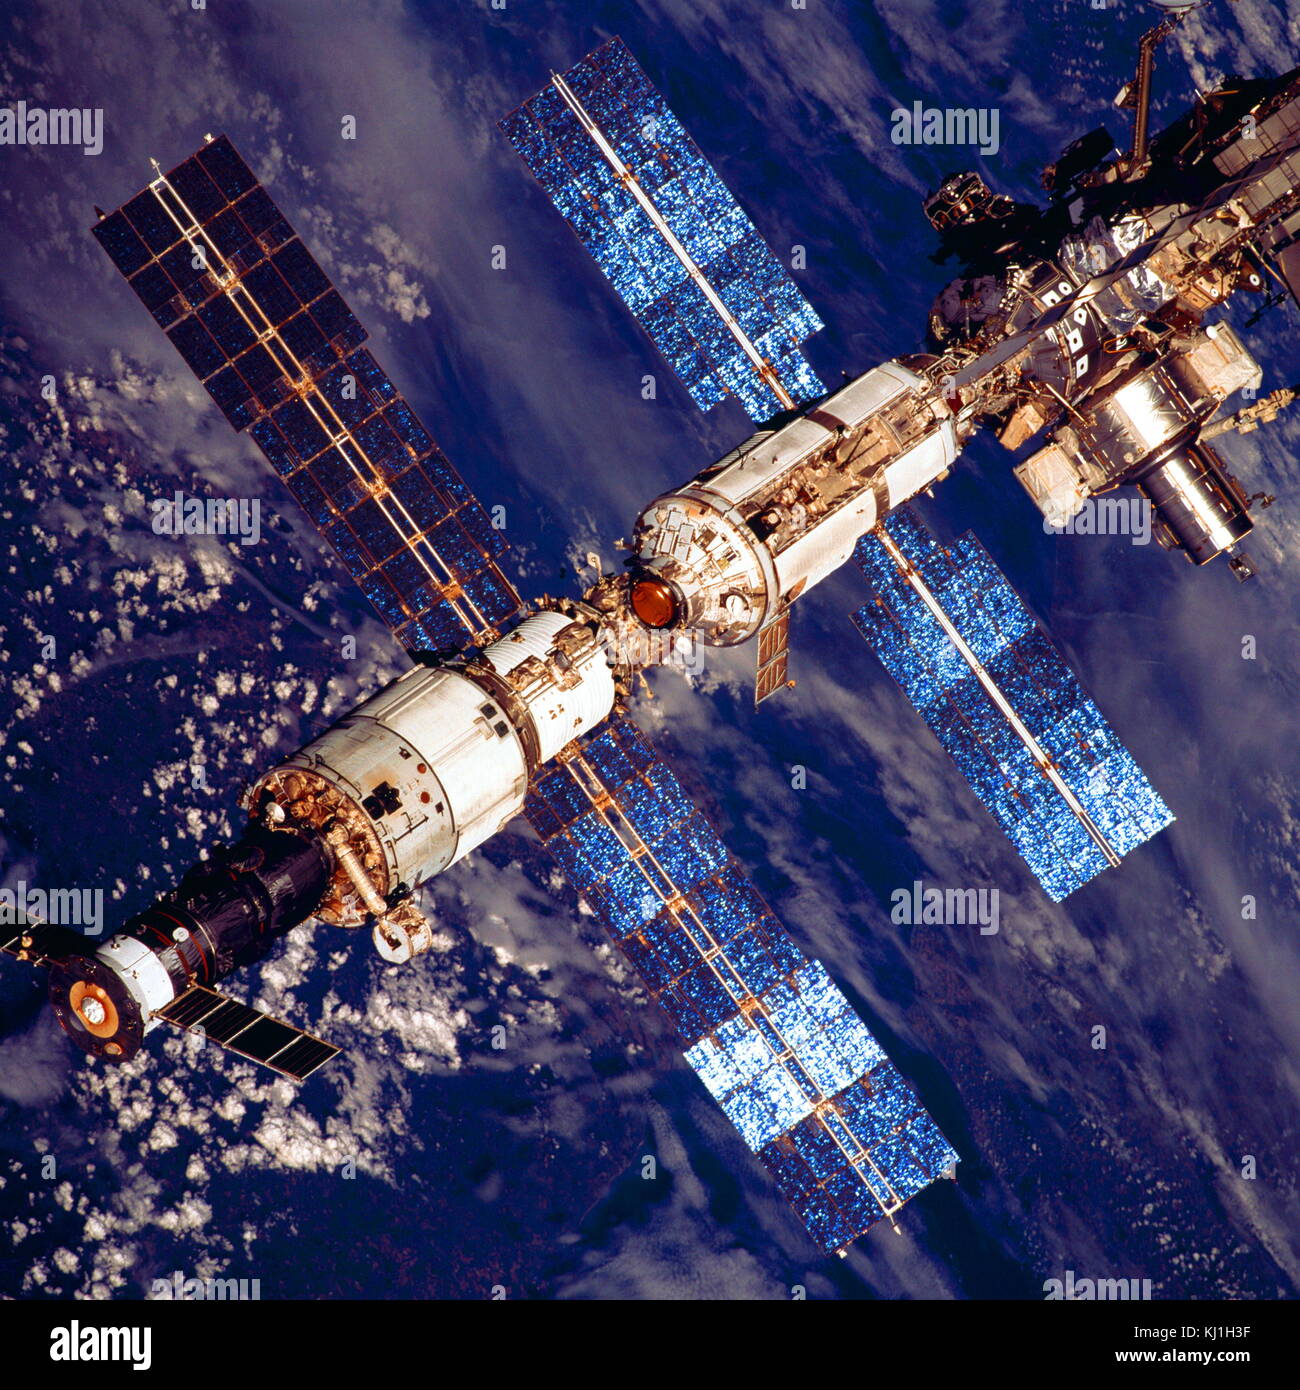 International Space Station photographed by crew members on the Space Shuttle Discovery after undocking on August 20, 2001 Stock Photo